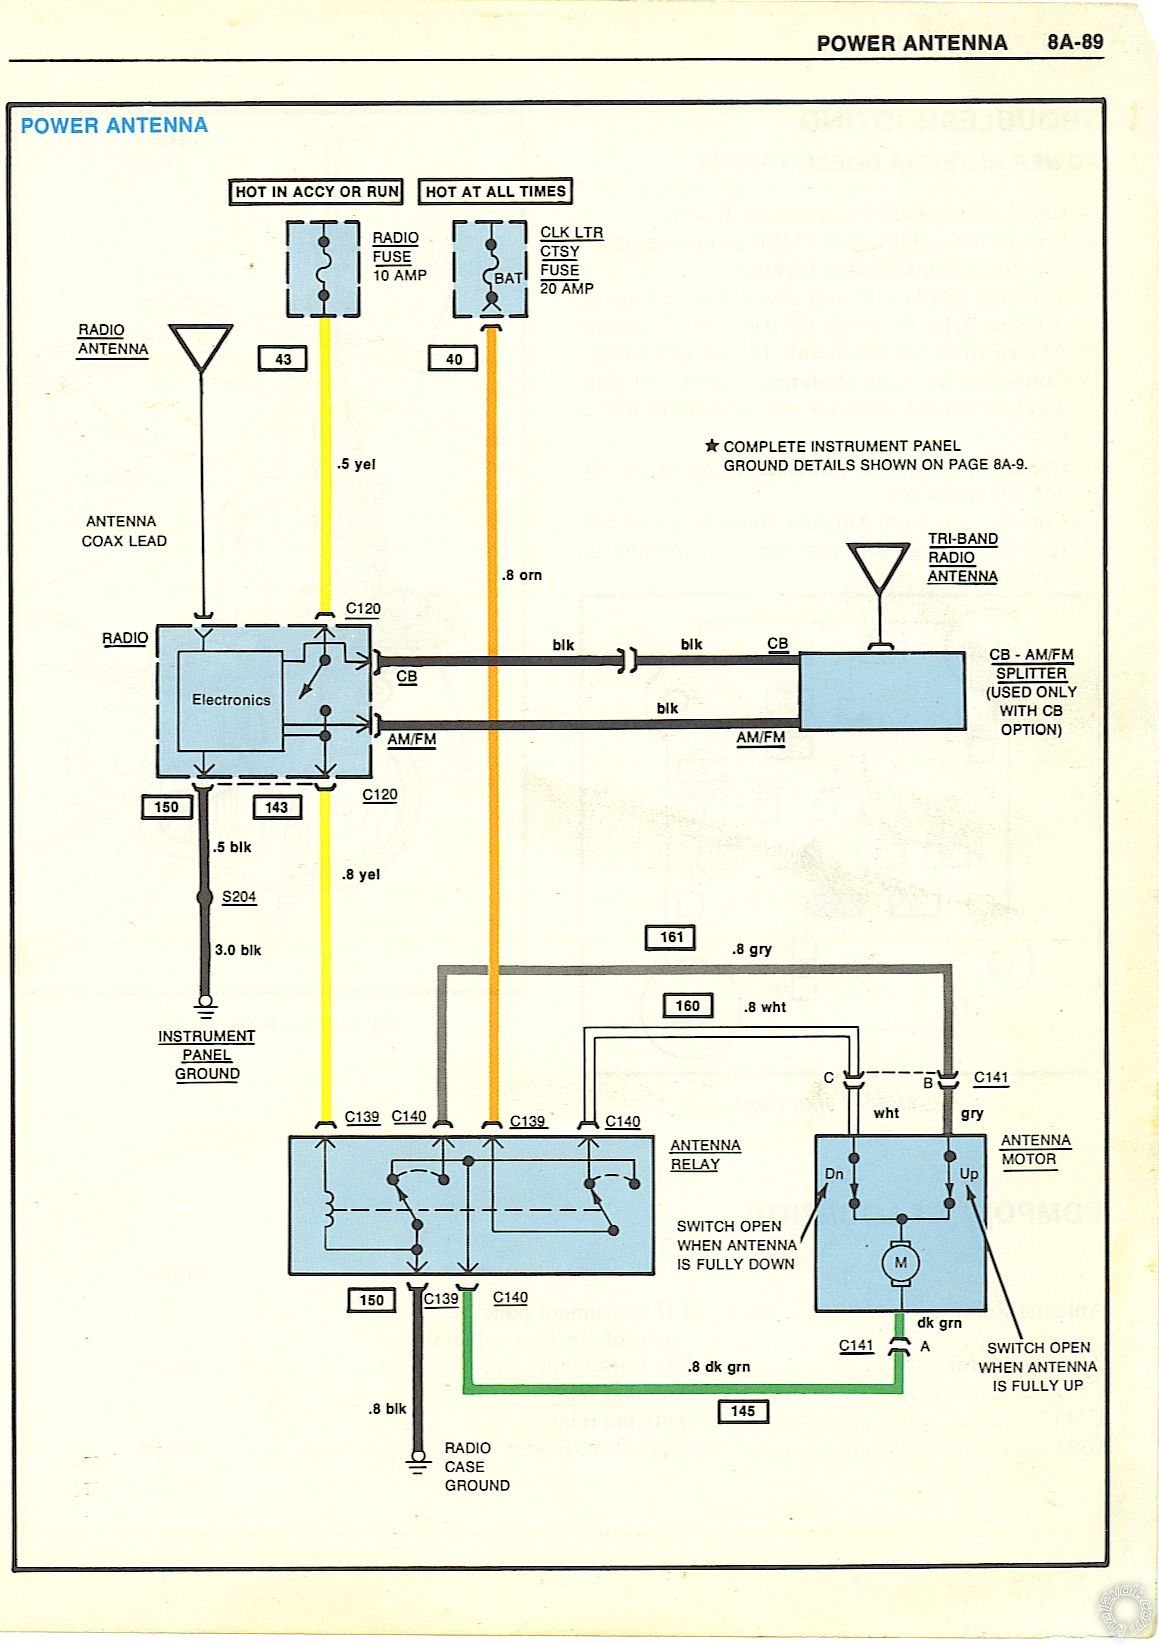 Power Antenna Relay Diagram -- posted image.